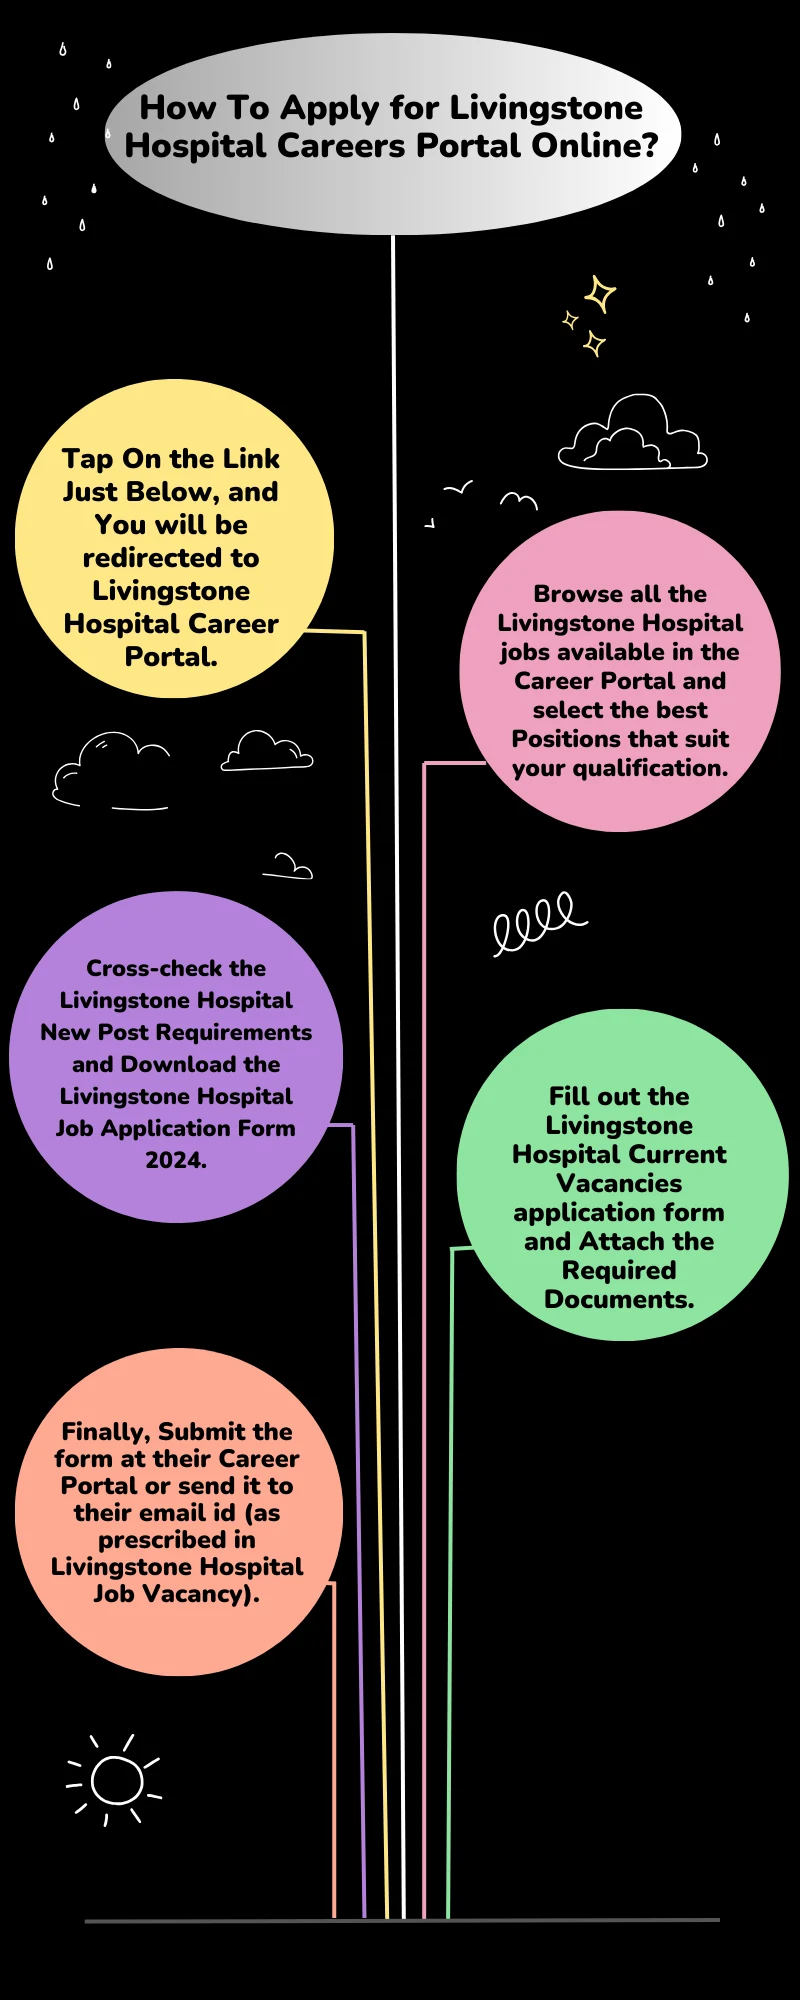 How To Apply for Livingstone Hospital Careers Portal Online?